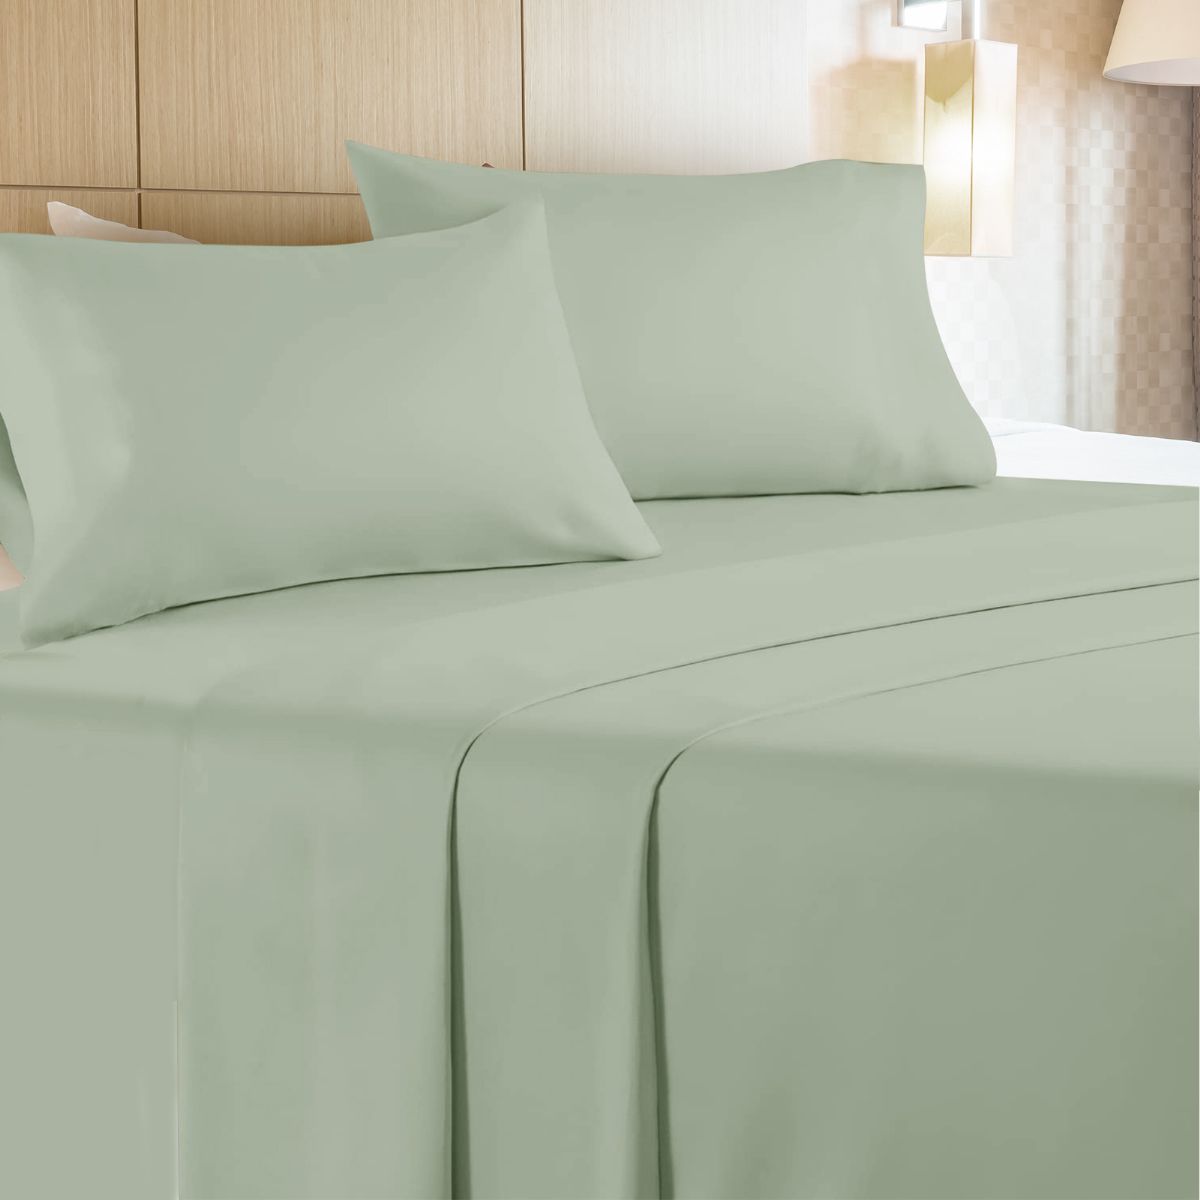 6 Wholesale 4 Piece Microfiber Bed Sheet Set Twin Size In Sage